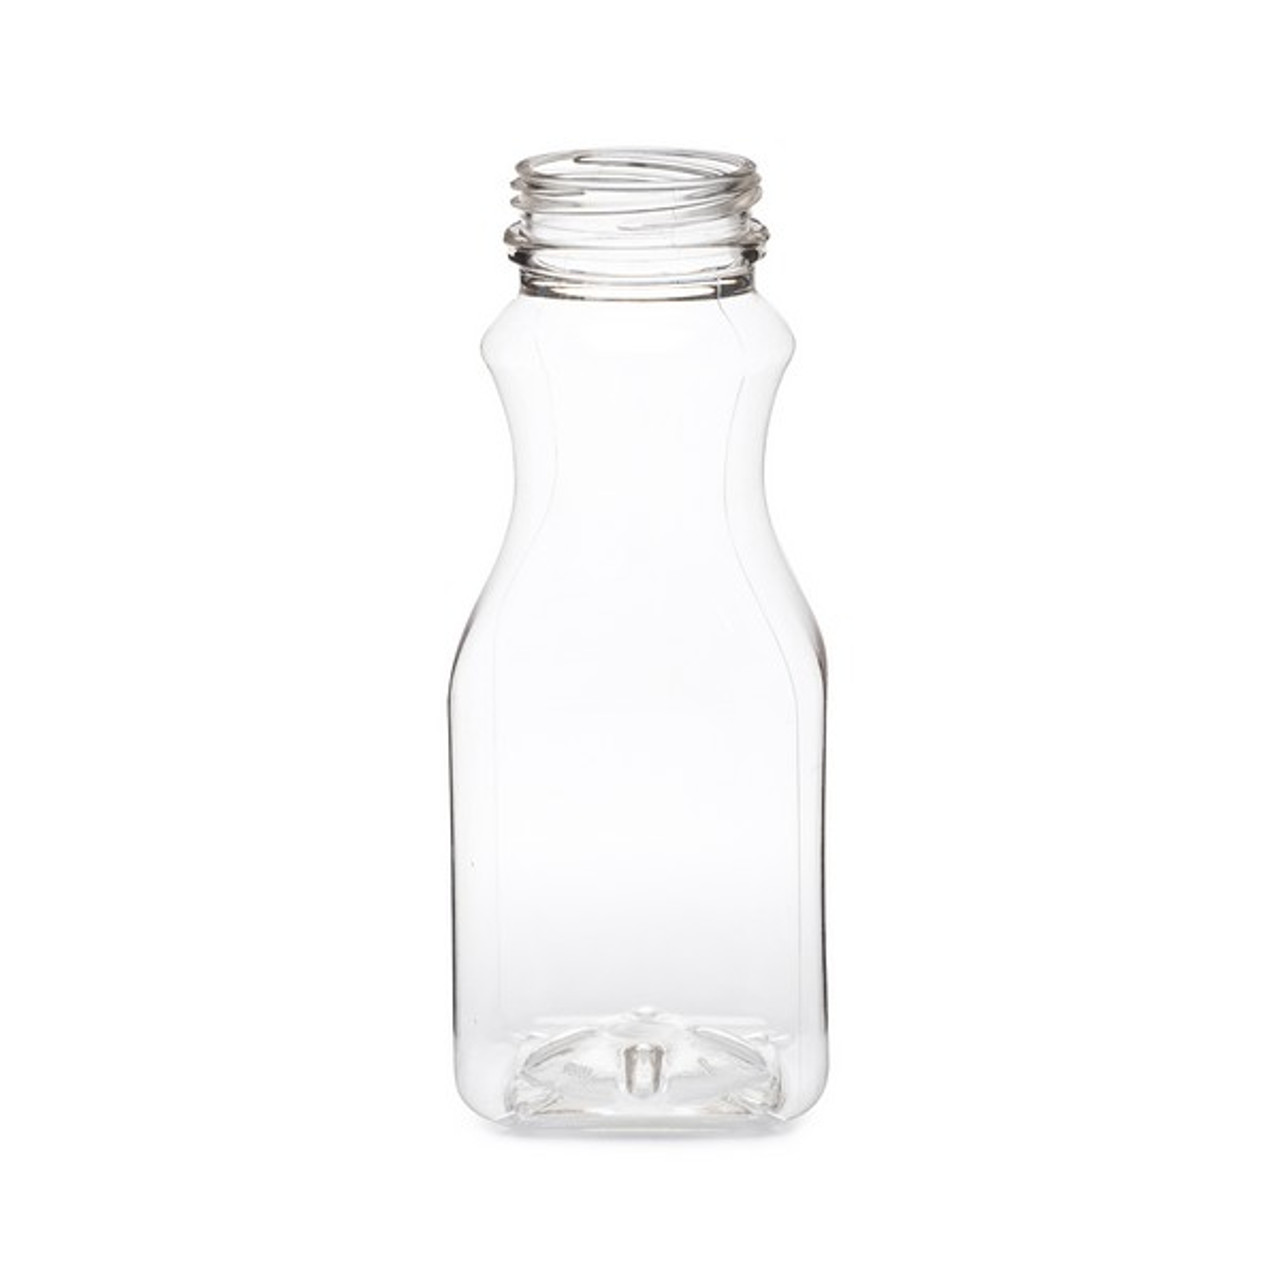 16 oz. Tall Square PET Clear Juice Bottle with Lid